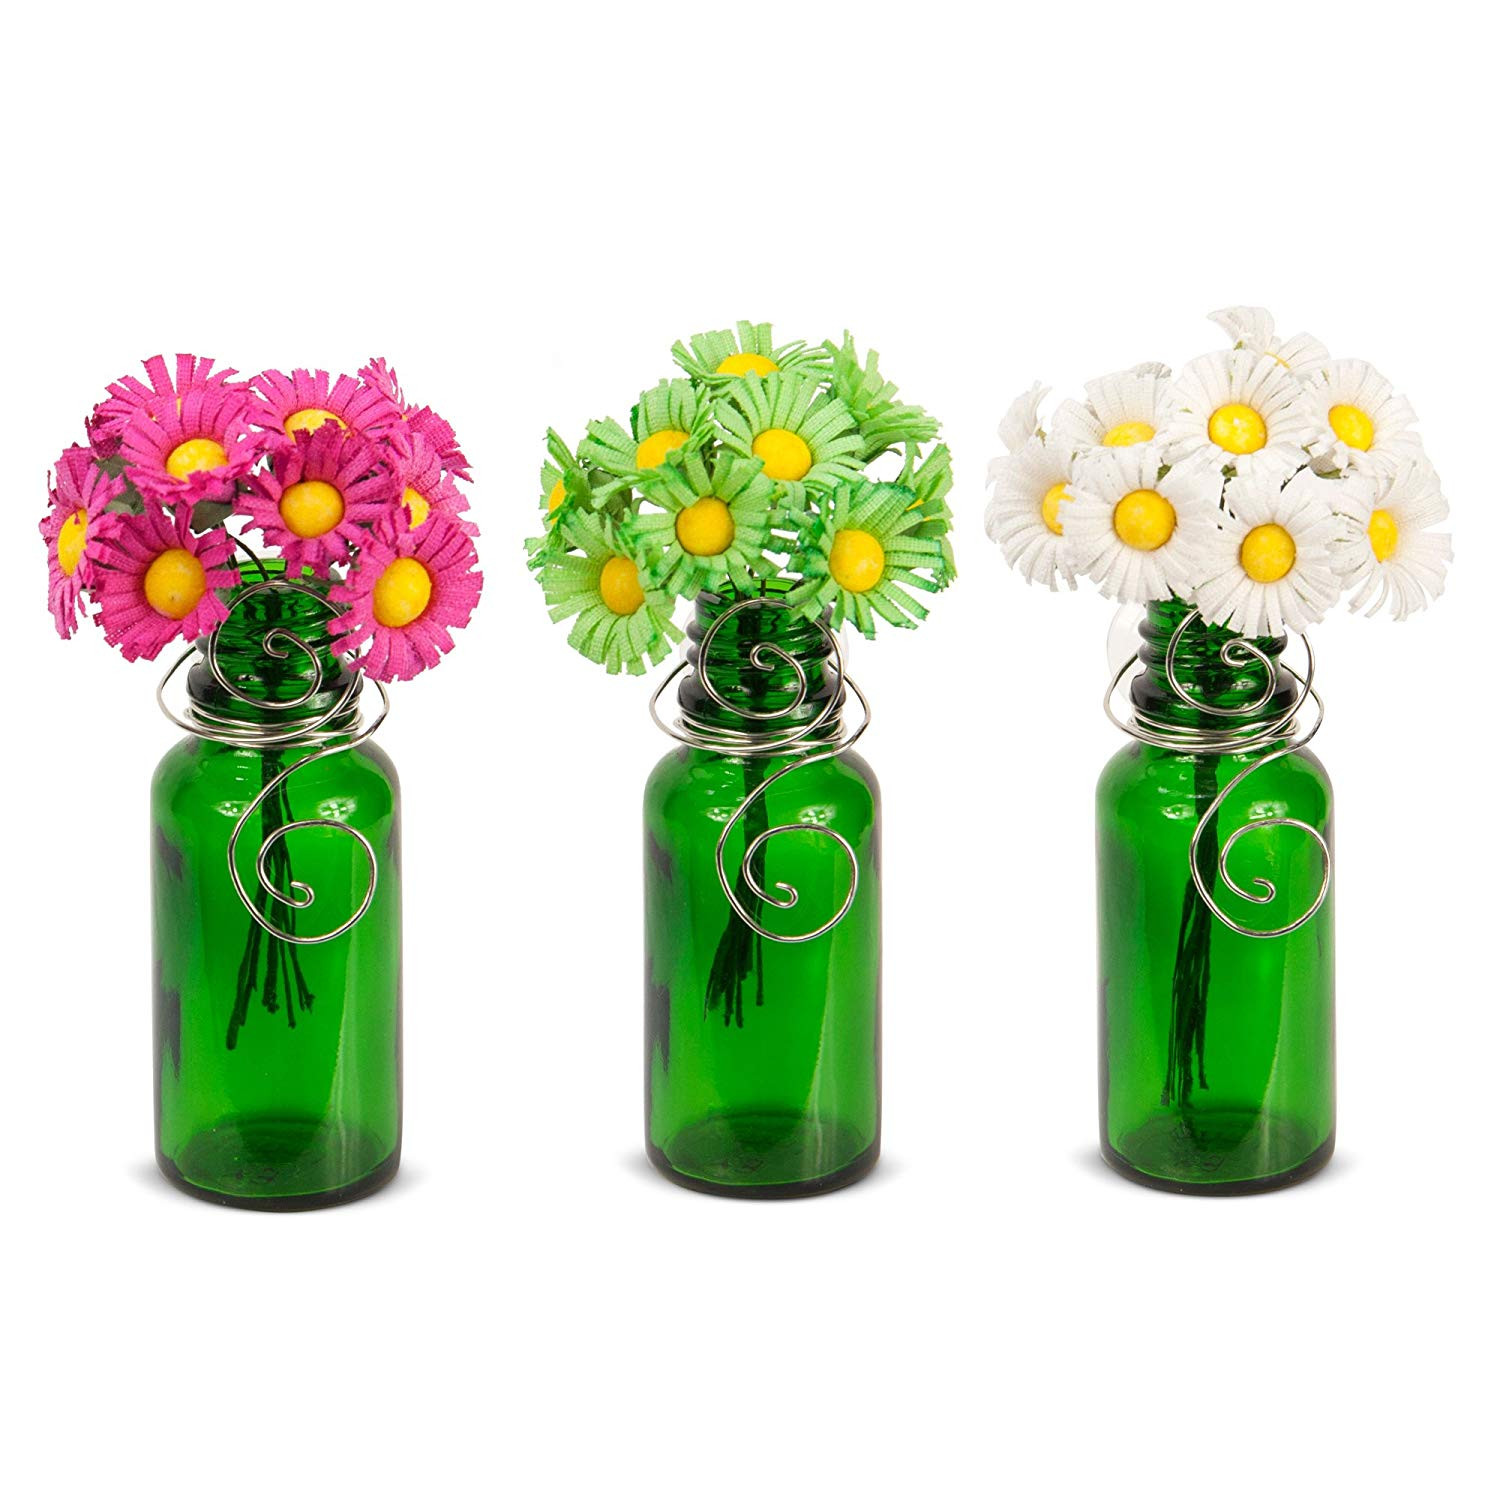 15 Cute Modern Art Glass Vase 2024 free download modern art glass vase of amazon com vazzini mini vase bouquet suction cup bud bottle in amazon com vazzini mini vase bouquet suction cup bud bottle holder with flowers decorative for window 